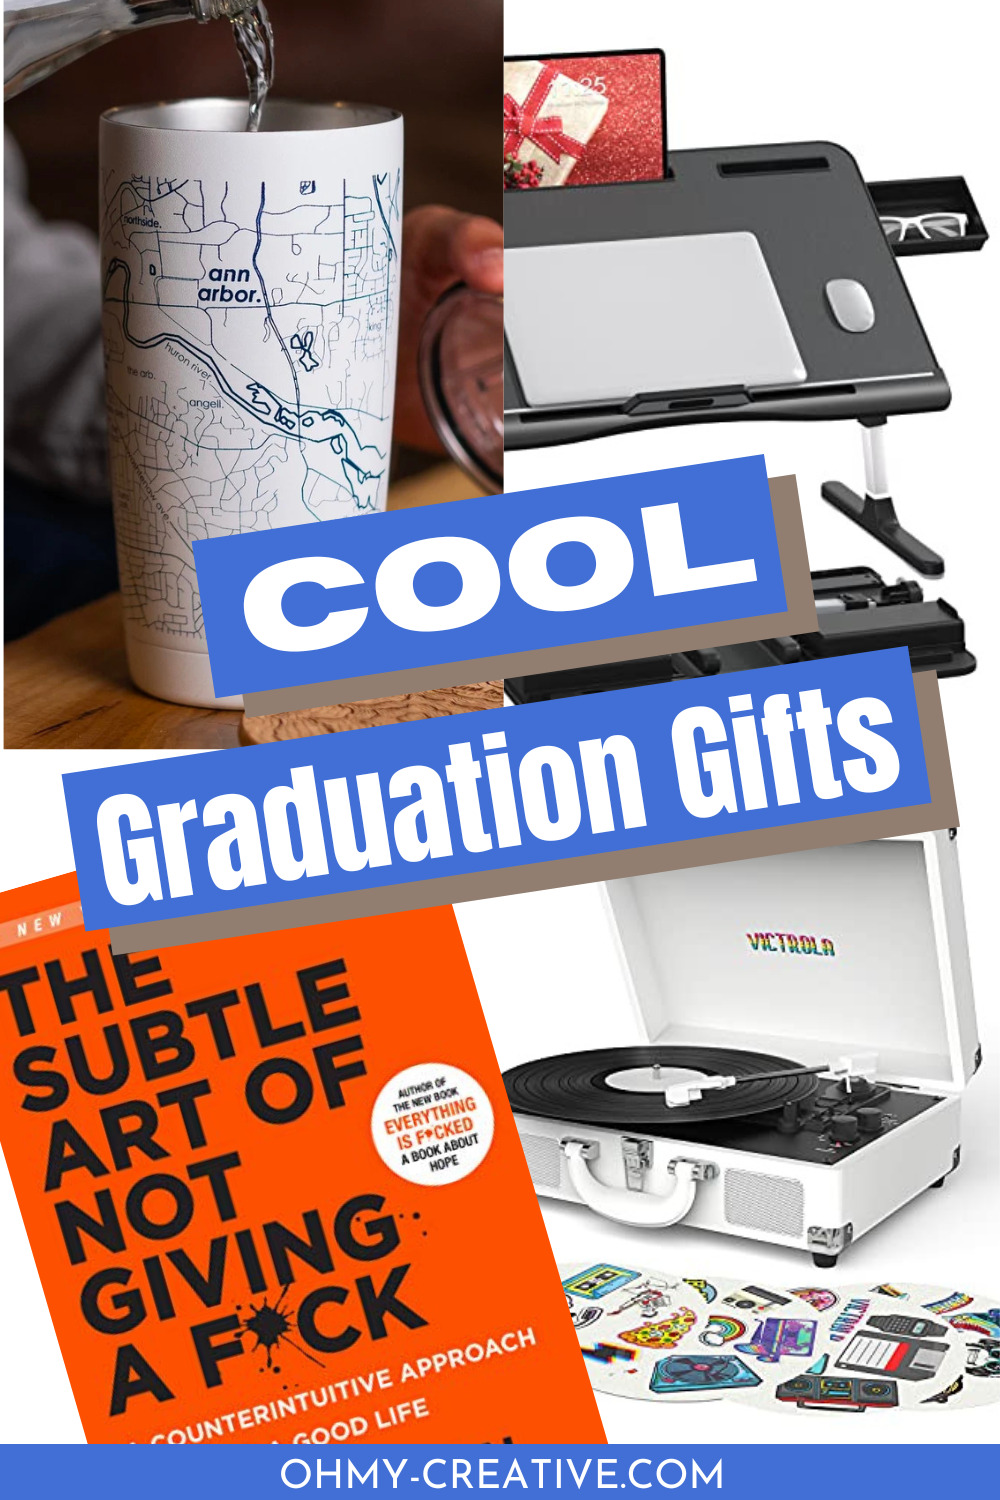 Cool Graduation Gifts For The Grad